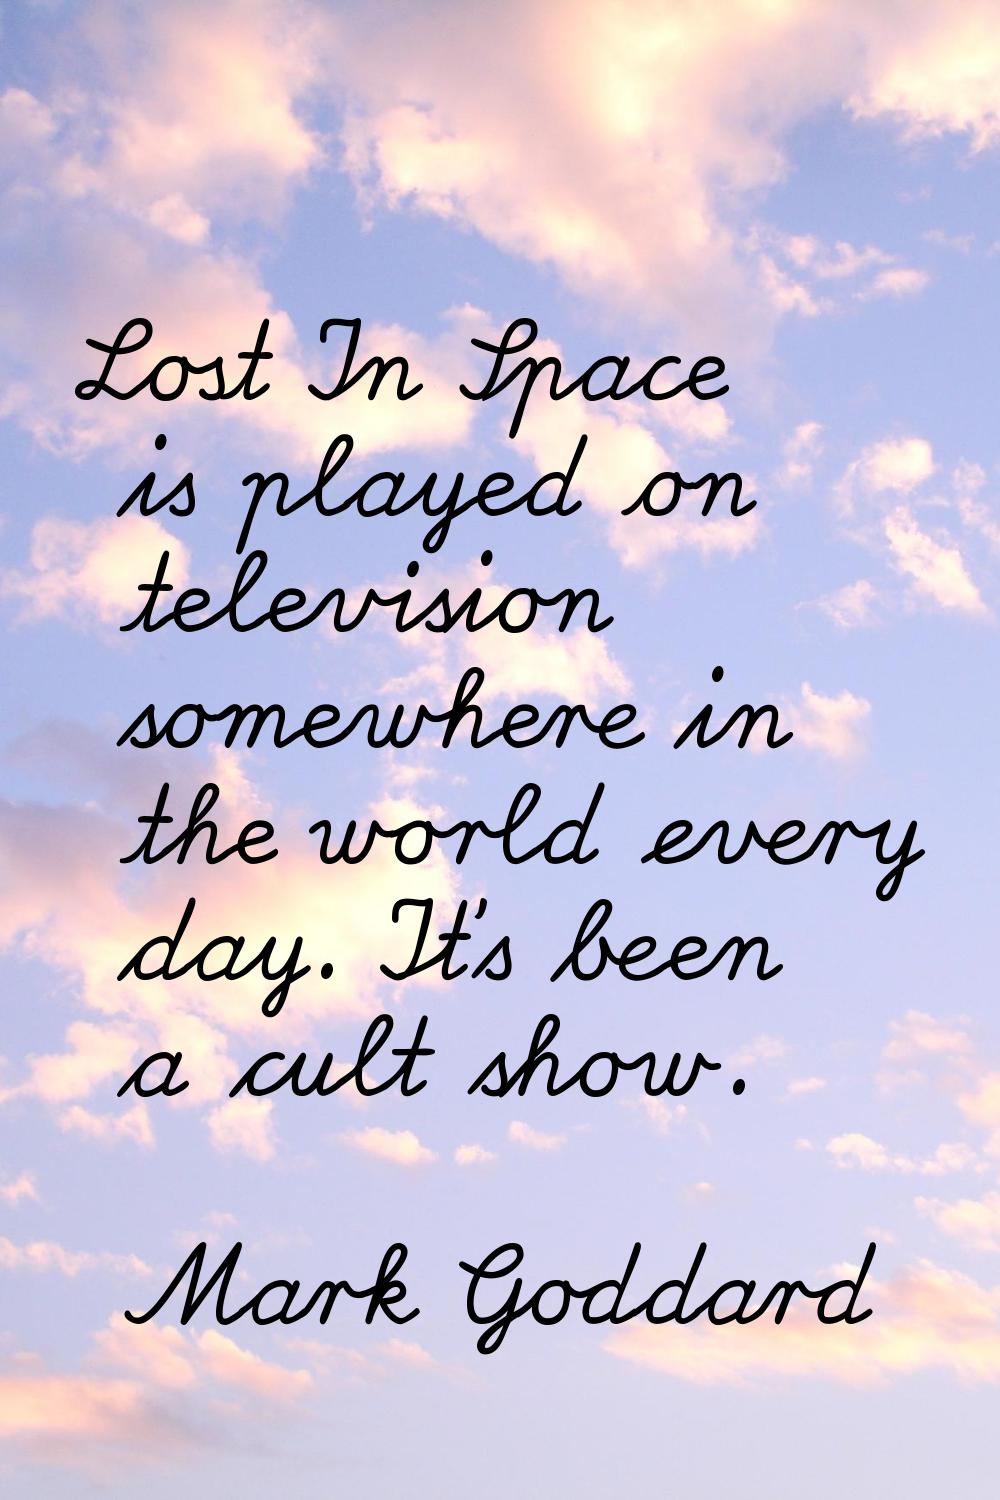 Lost In Space is played on television somewhere in the world every day. It's been a cult show.